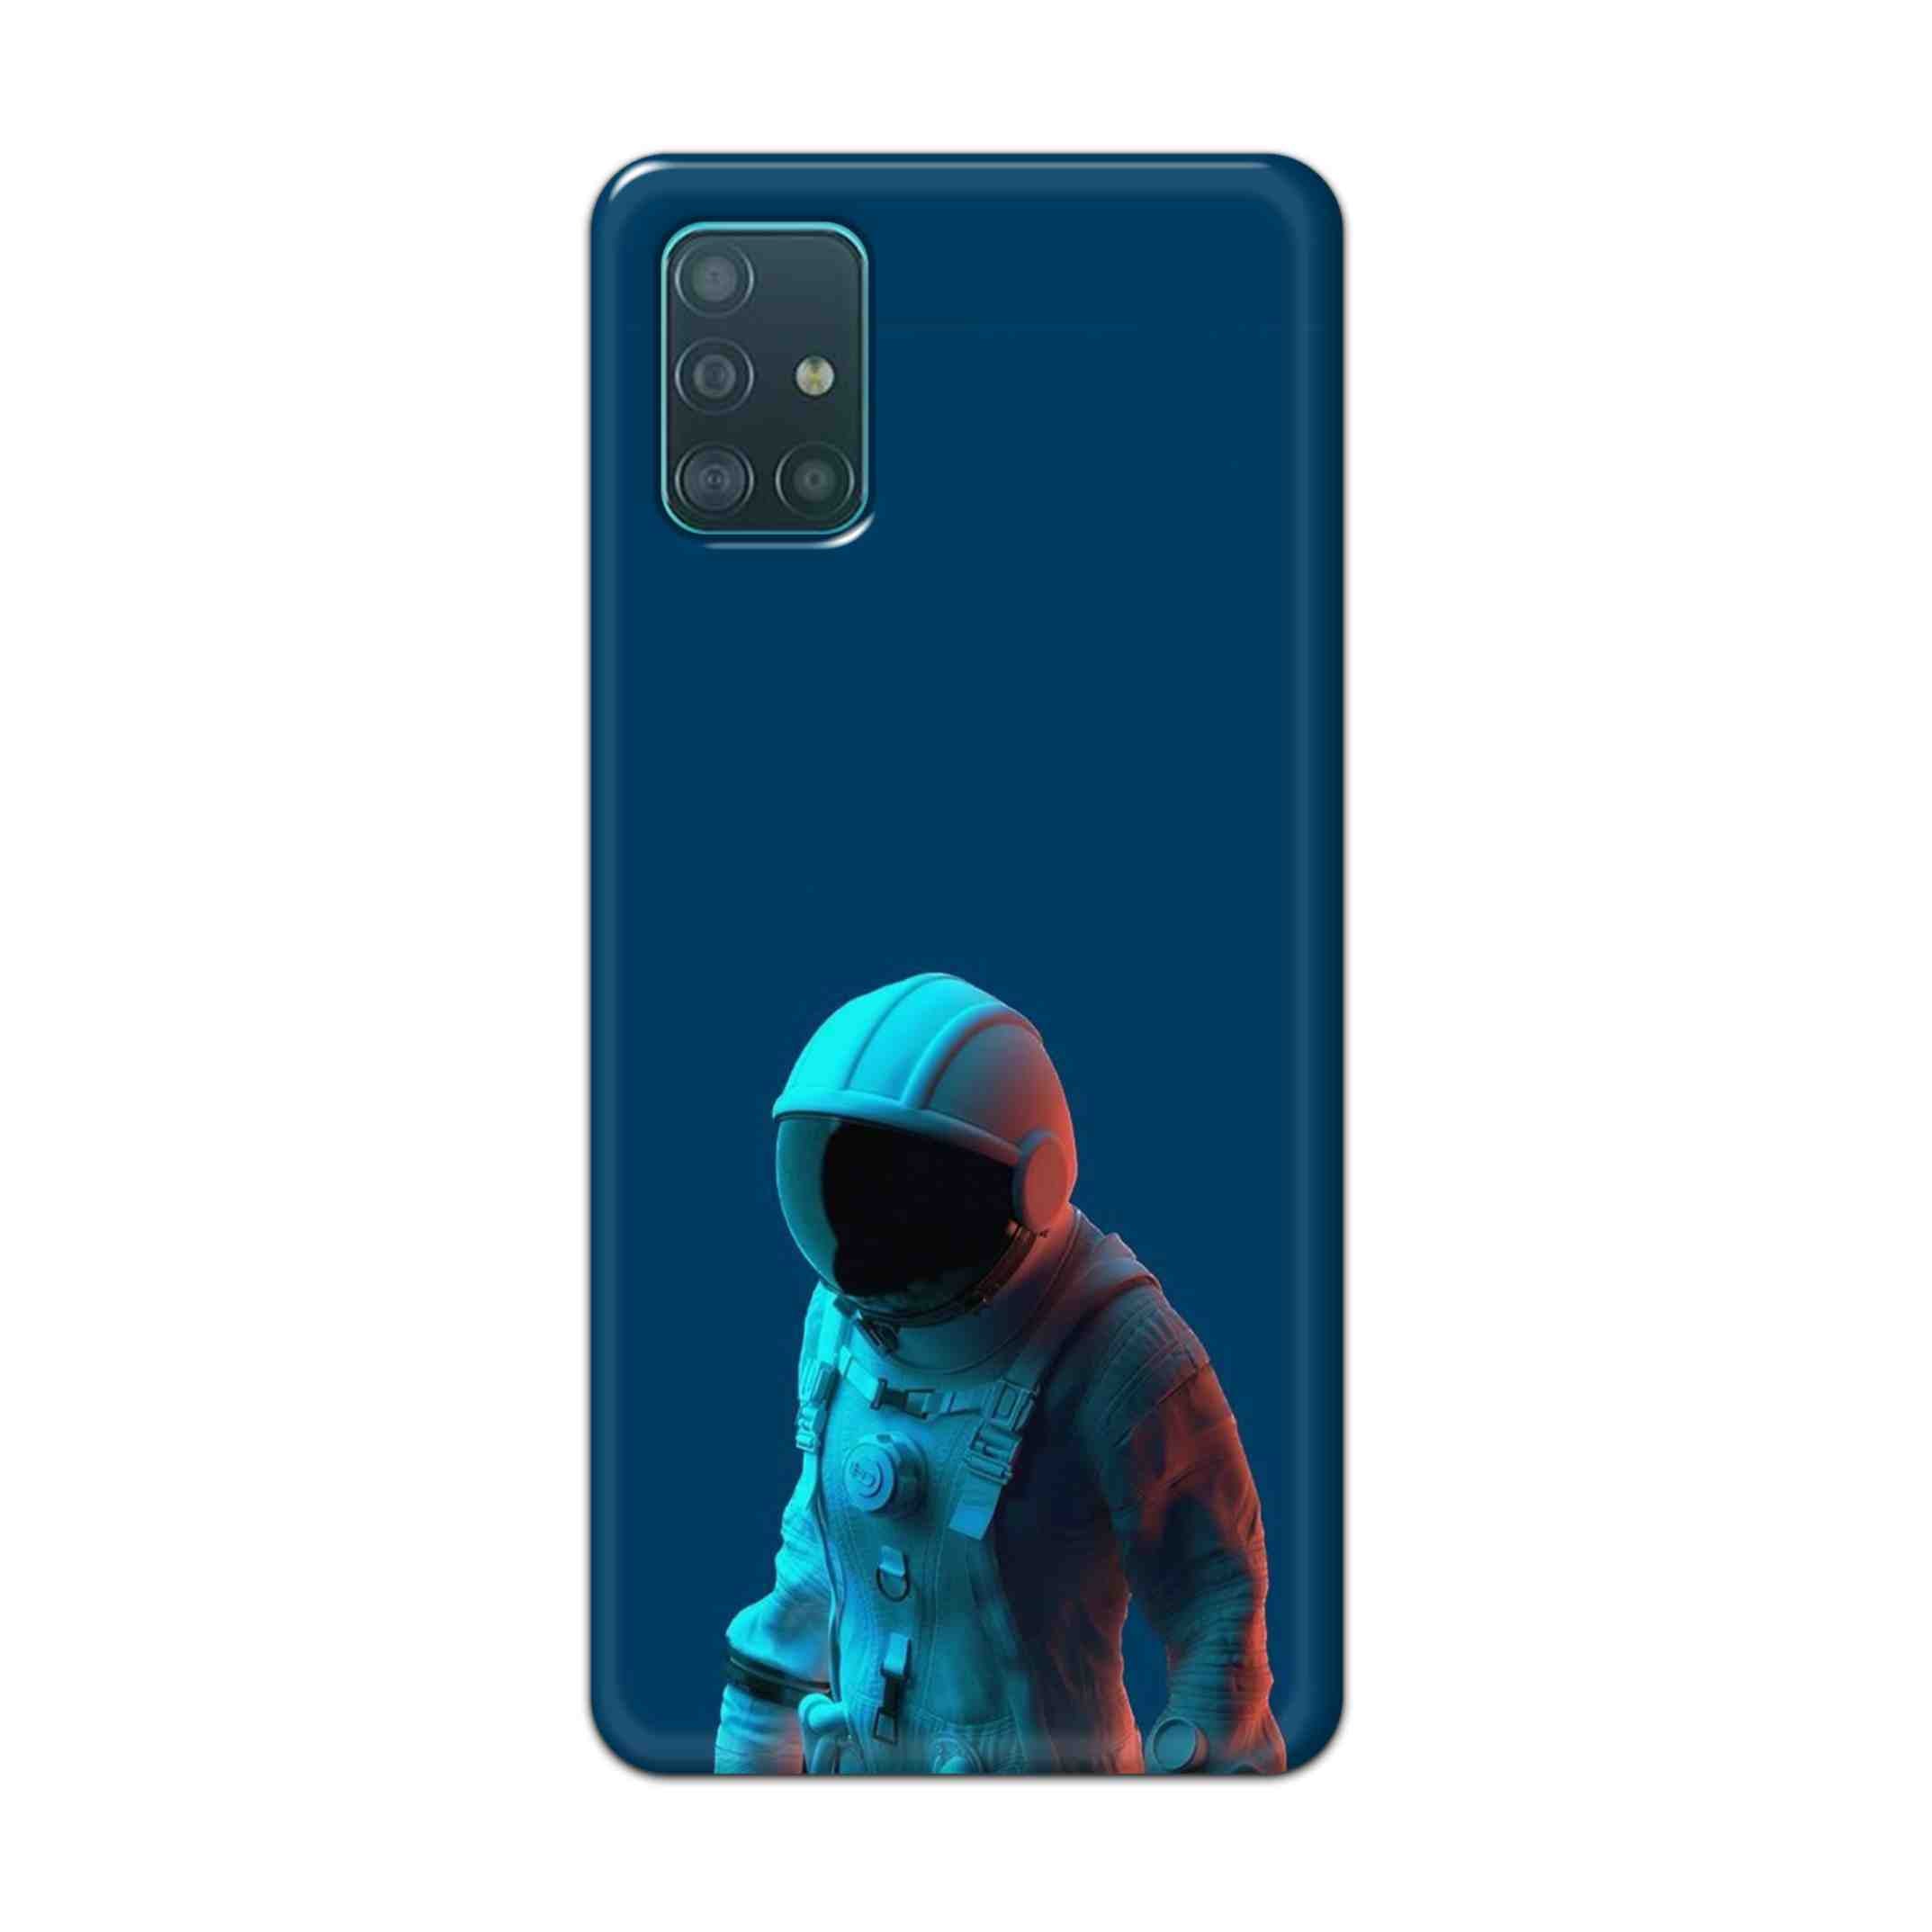 Buy Blue Astronaut Hard Back Mobile Phone Case Cover For Samsung A51 Online